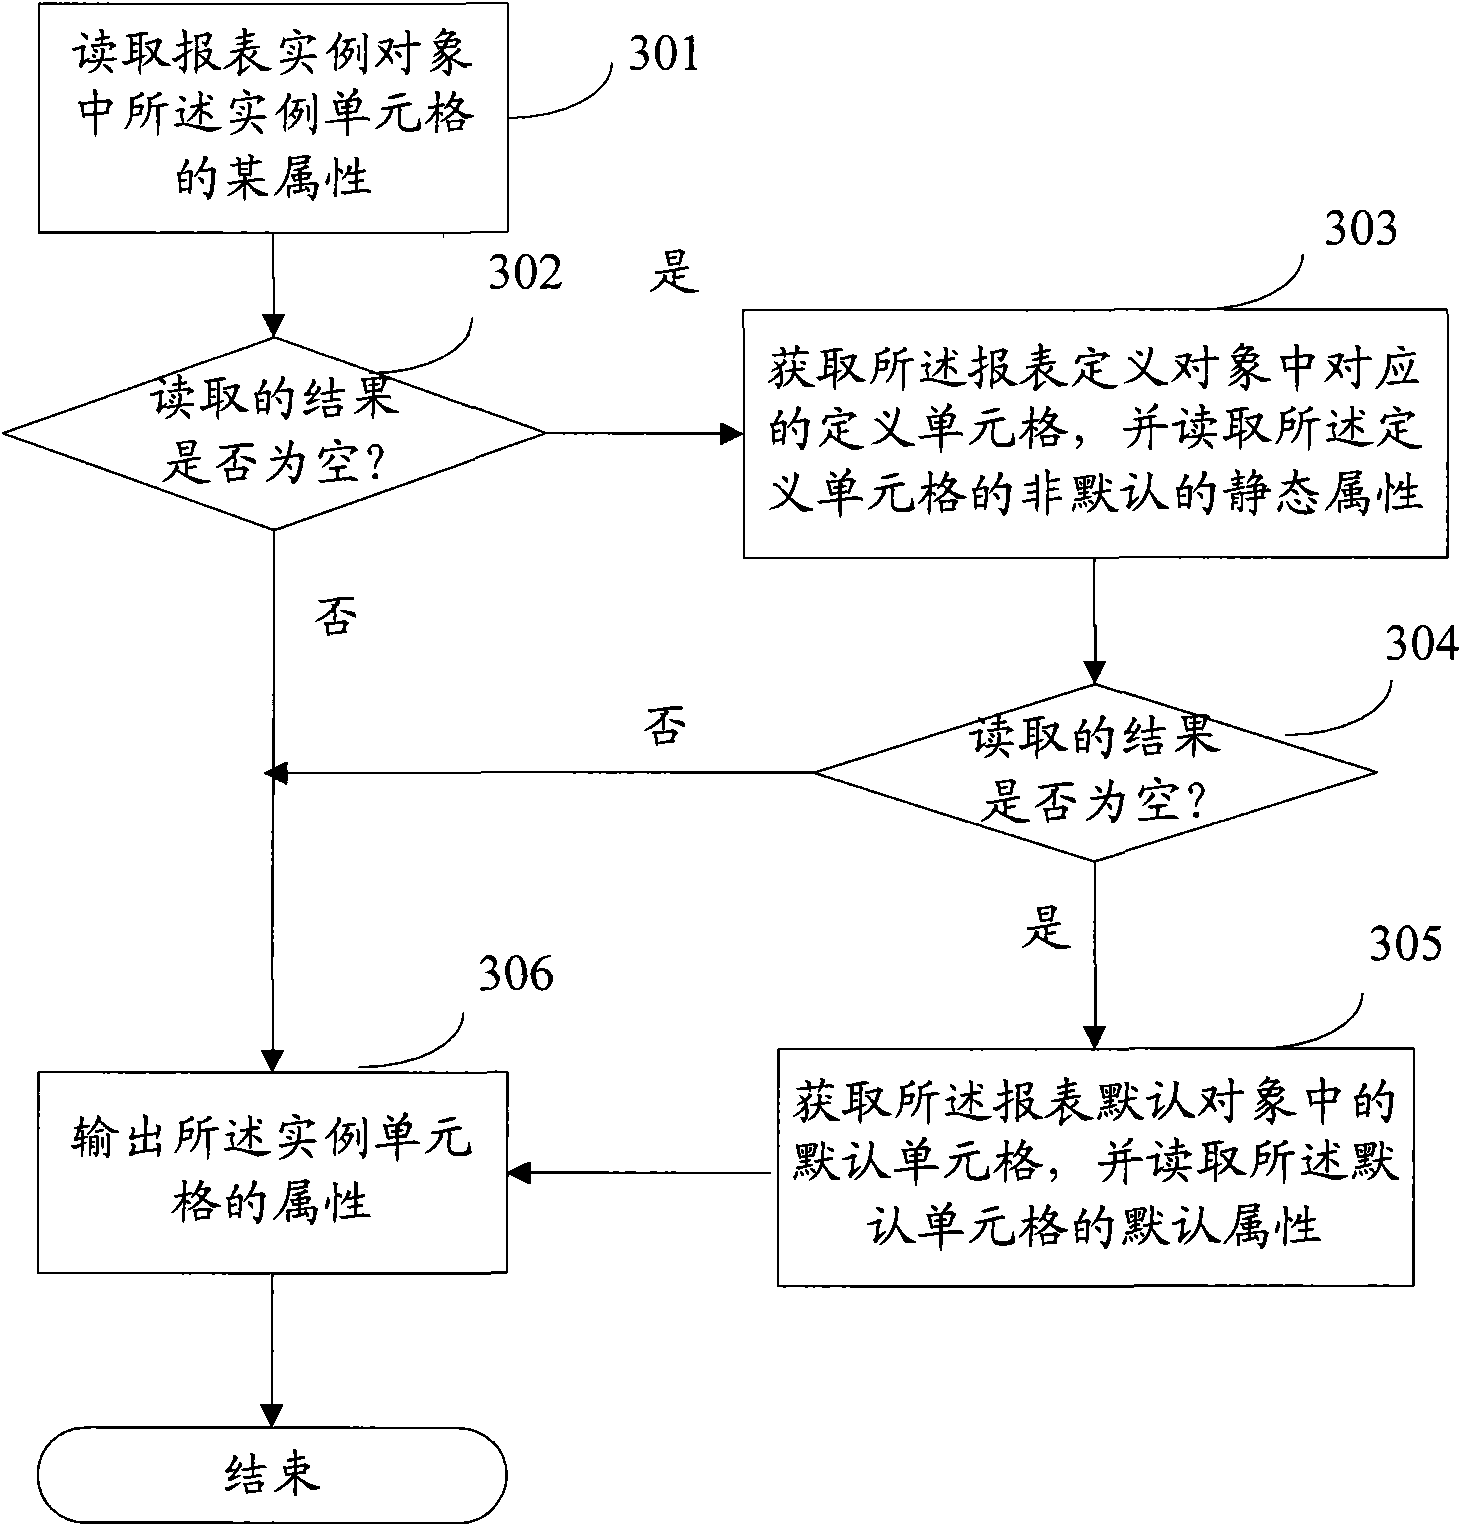 Method and apparatus for storing report form embodiment, and method for reading report form